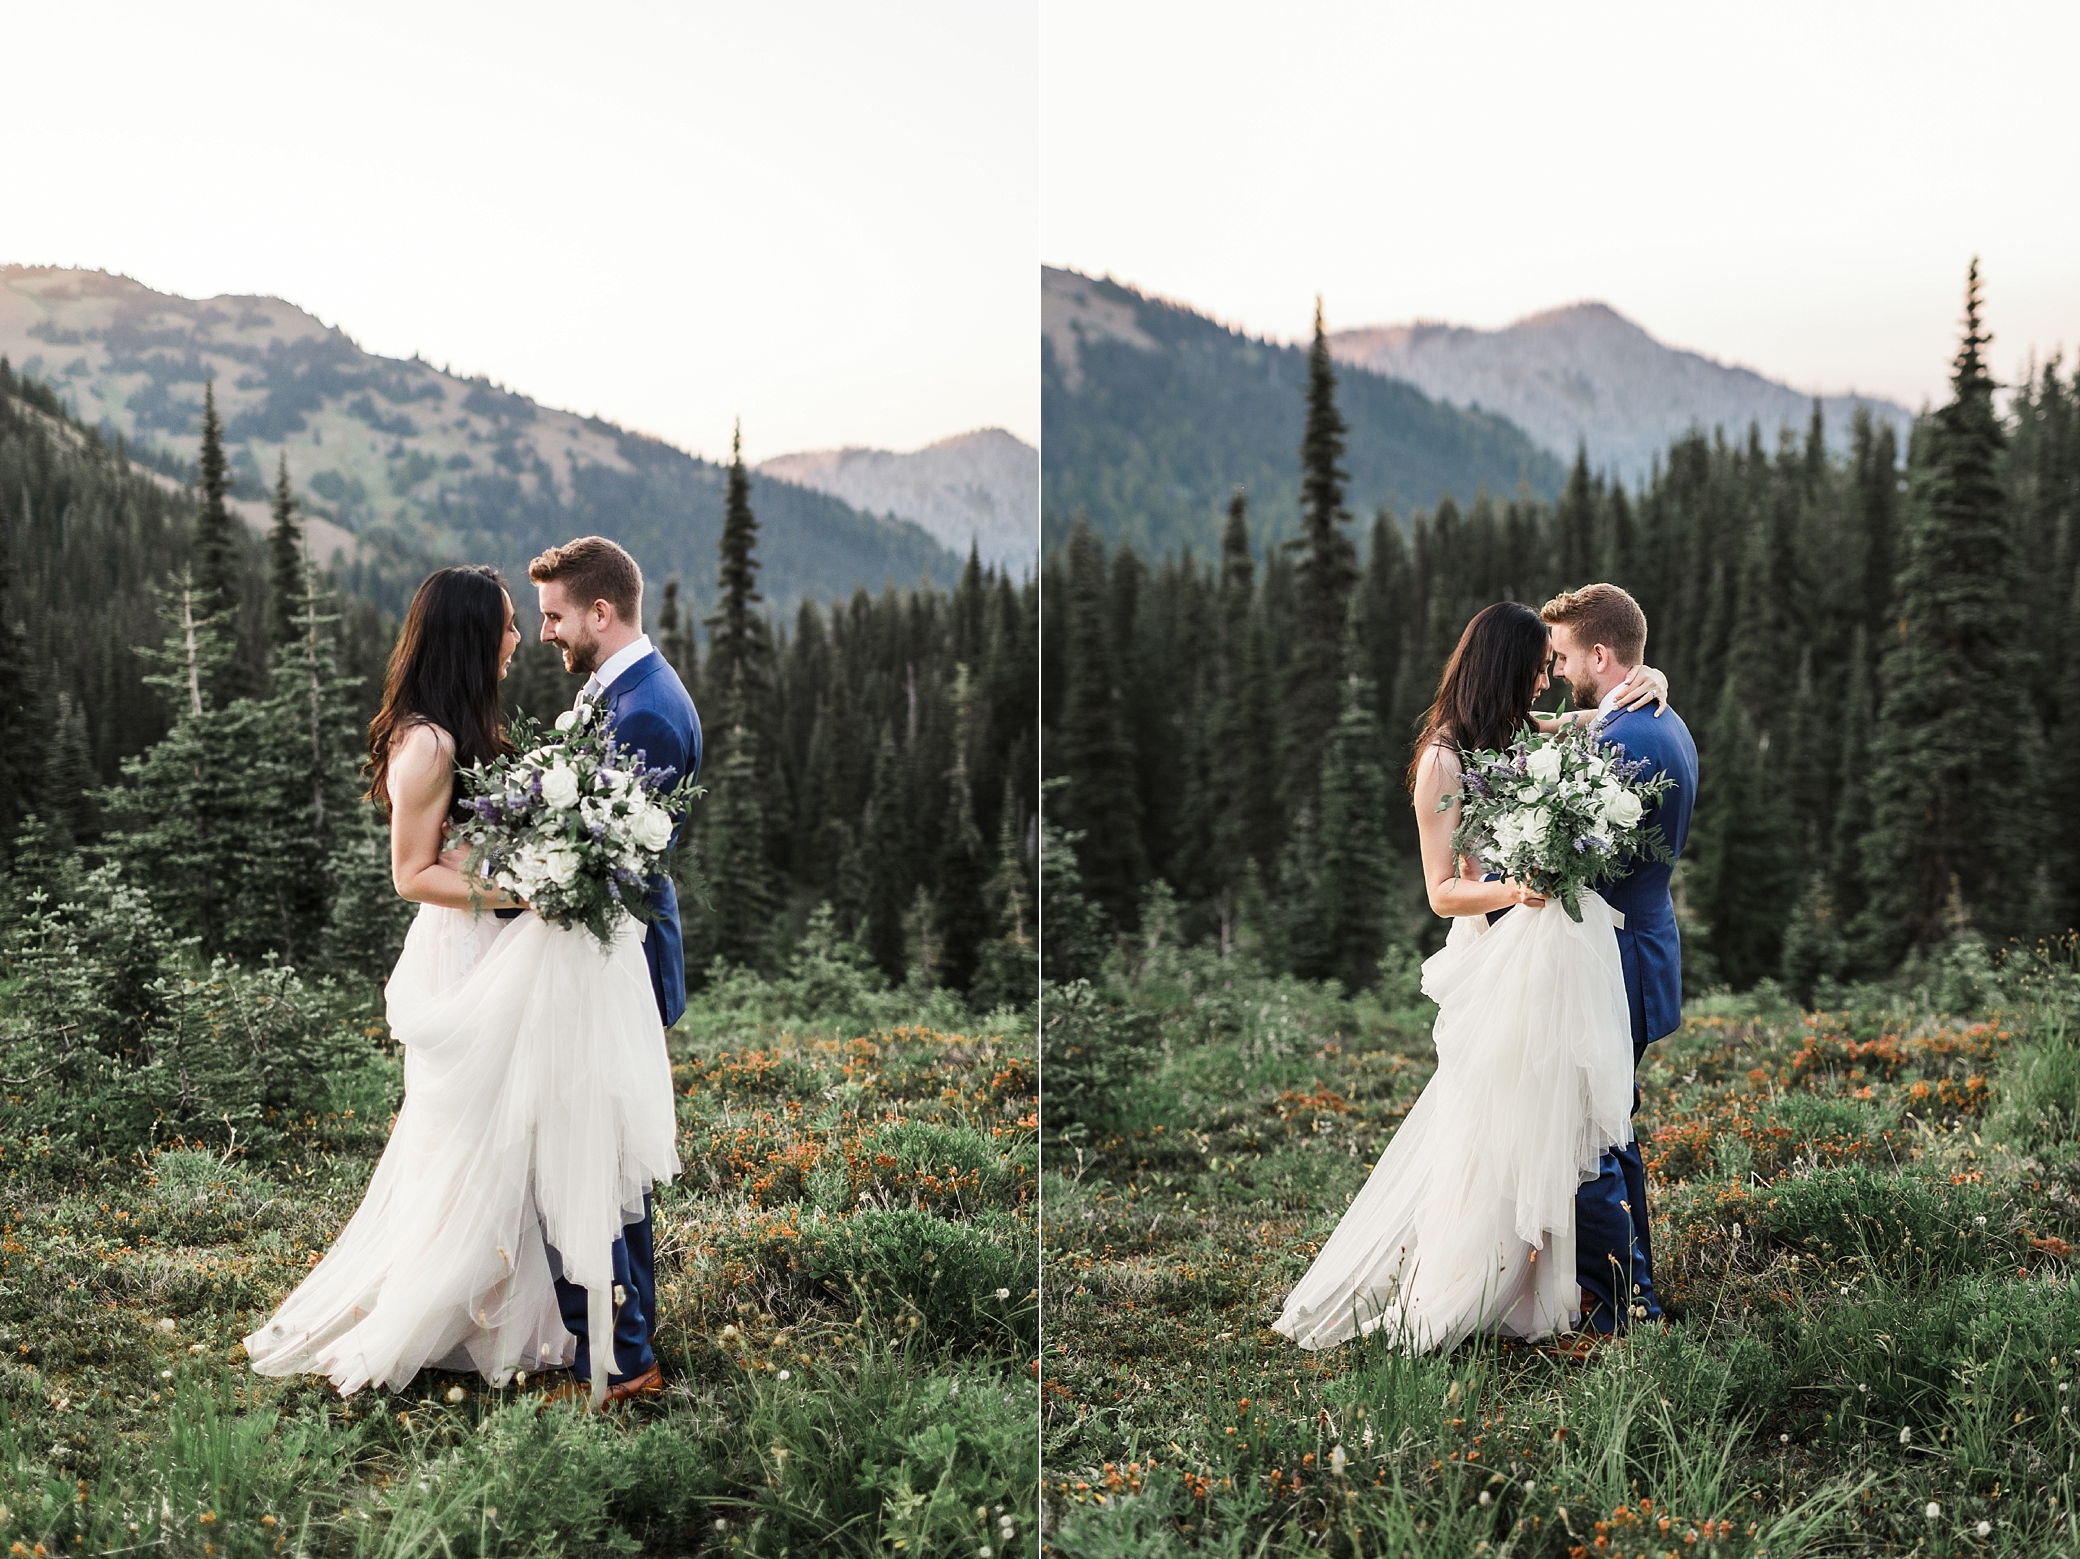 Bride and groom portraits at Hurricane Ridge Elopement in the Olympic National Park | Megan Montalvo Photography 